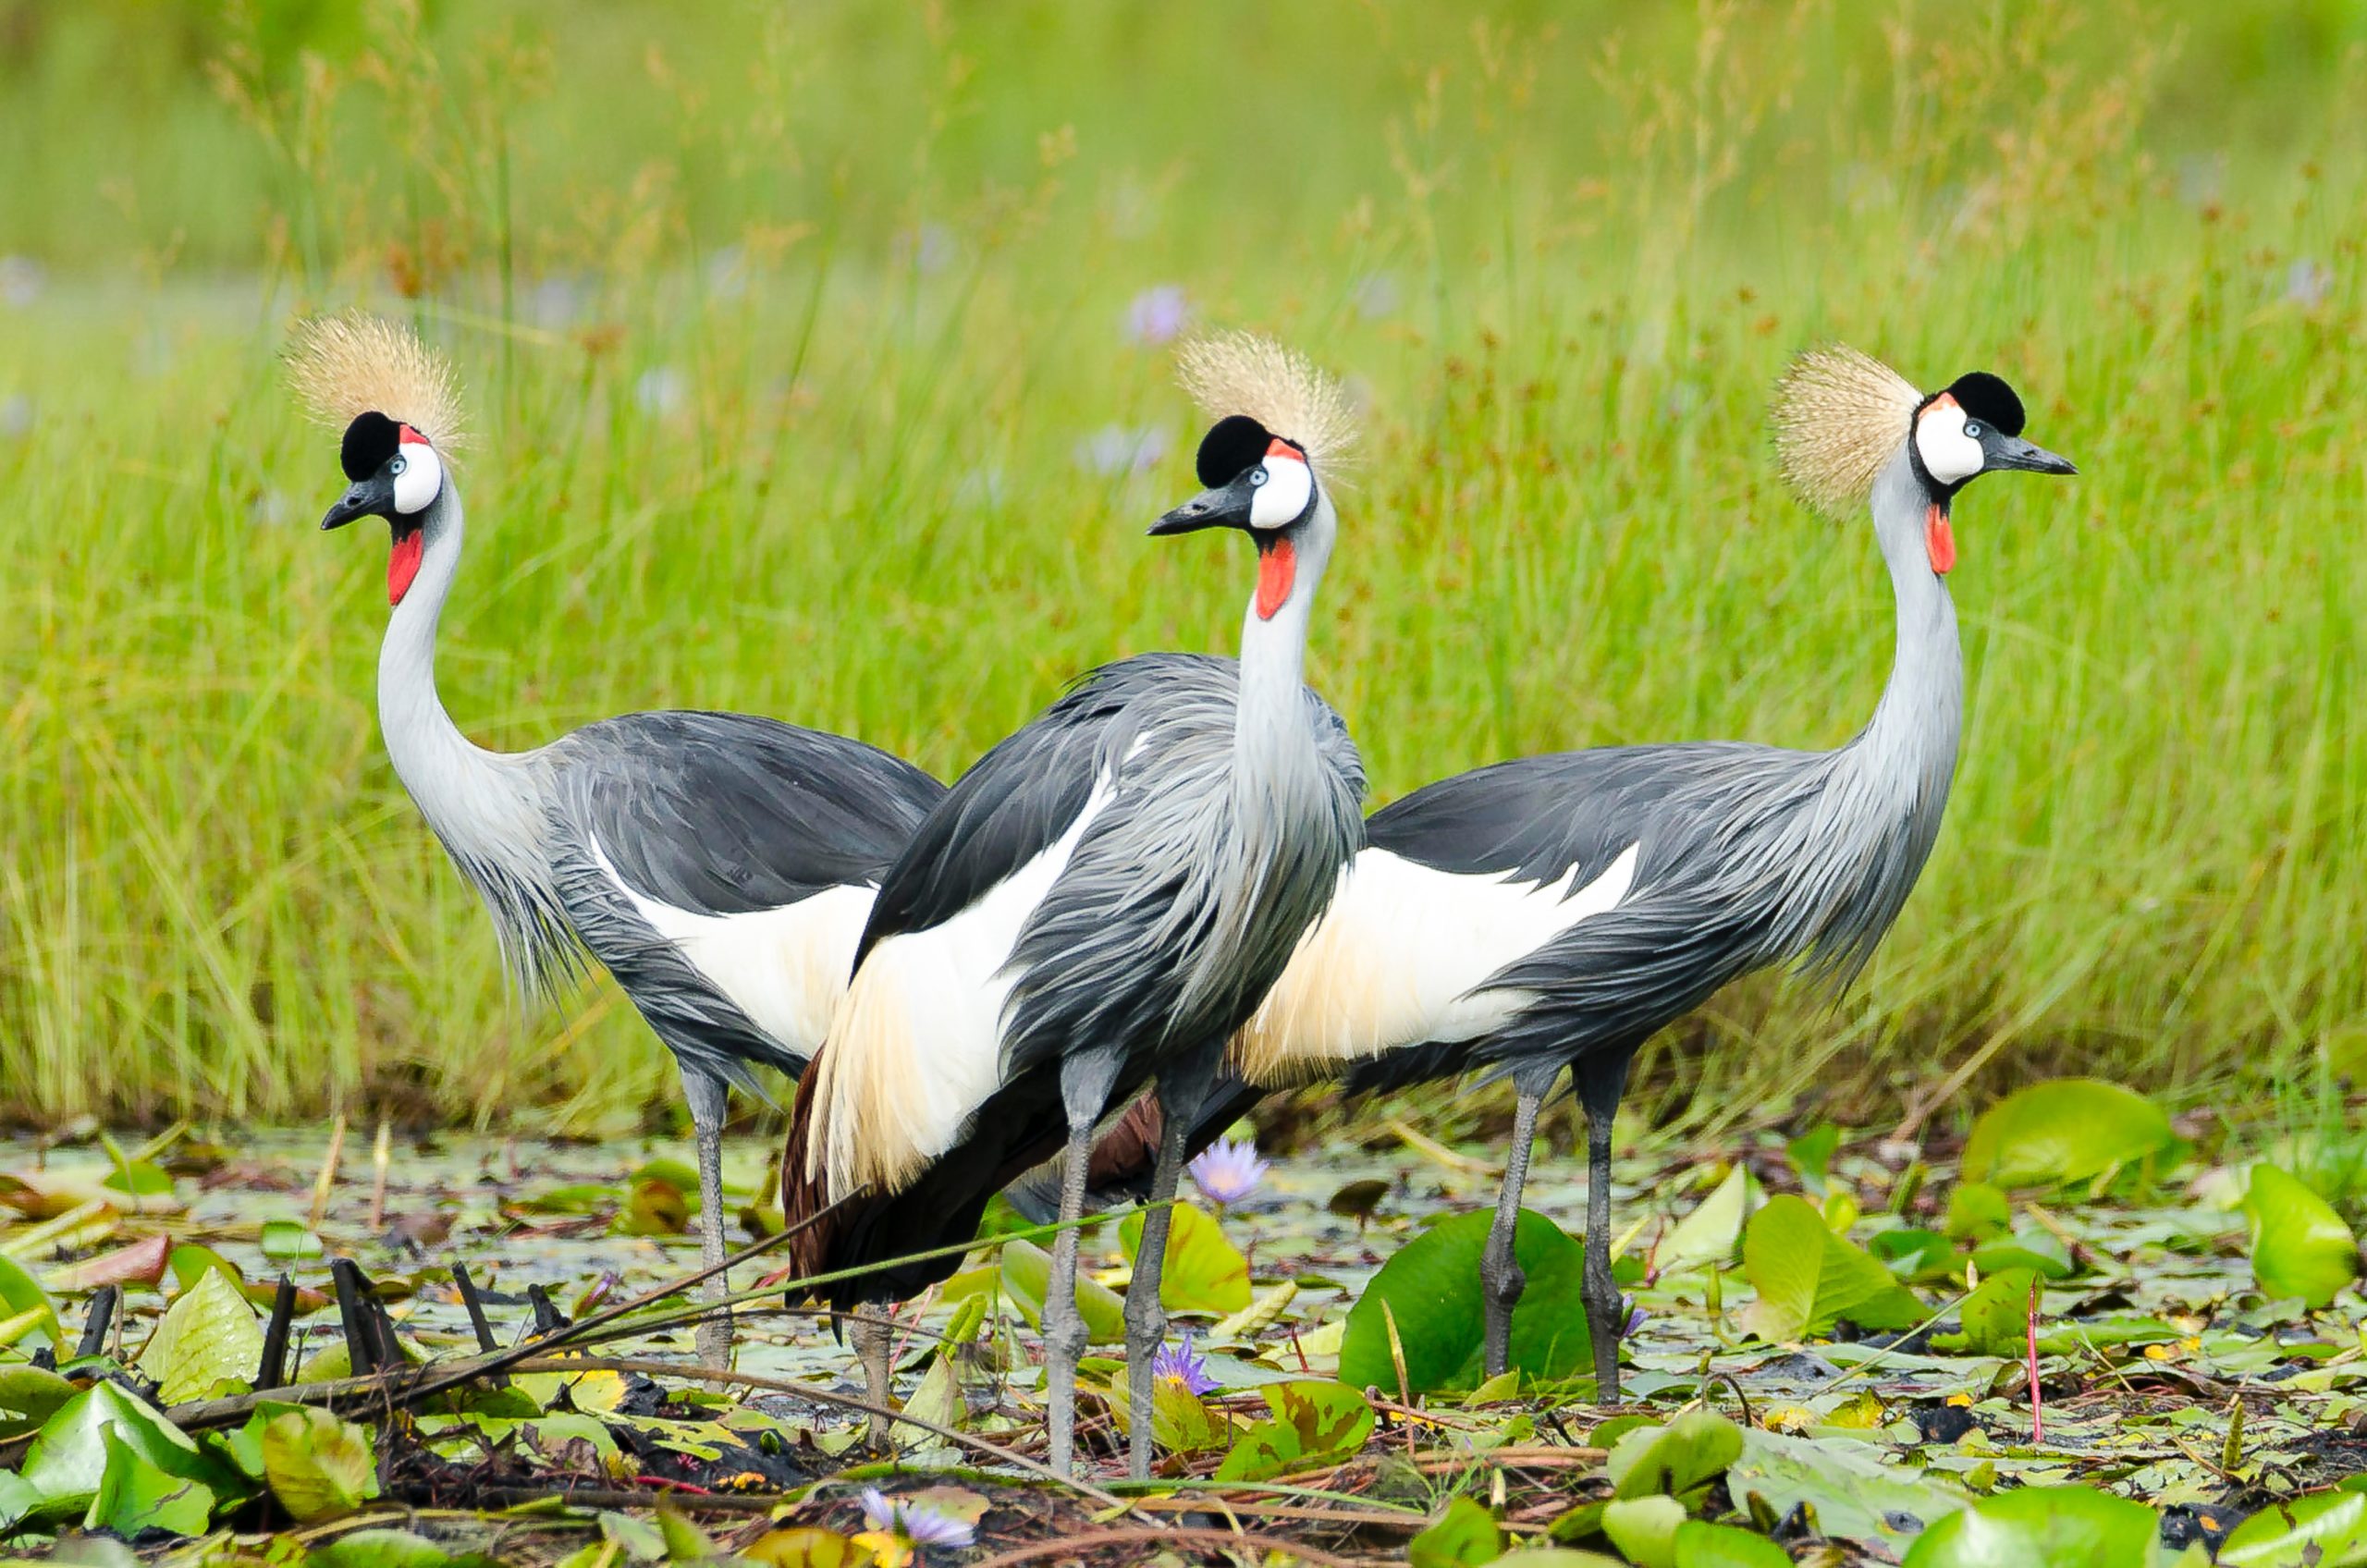 Gray-crowned Crane is part of the crane family Gruidae